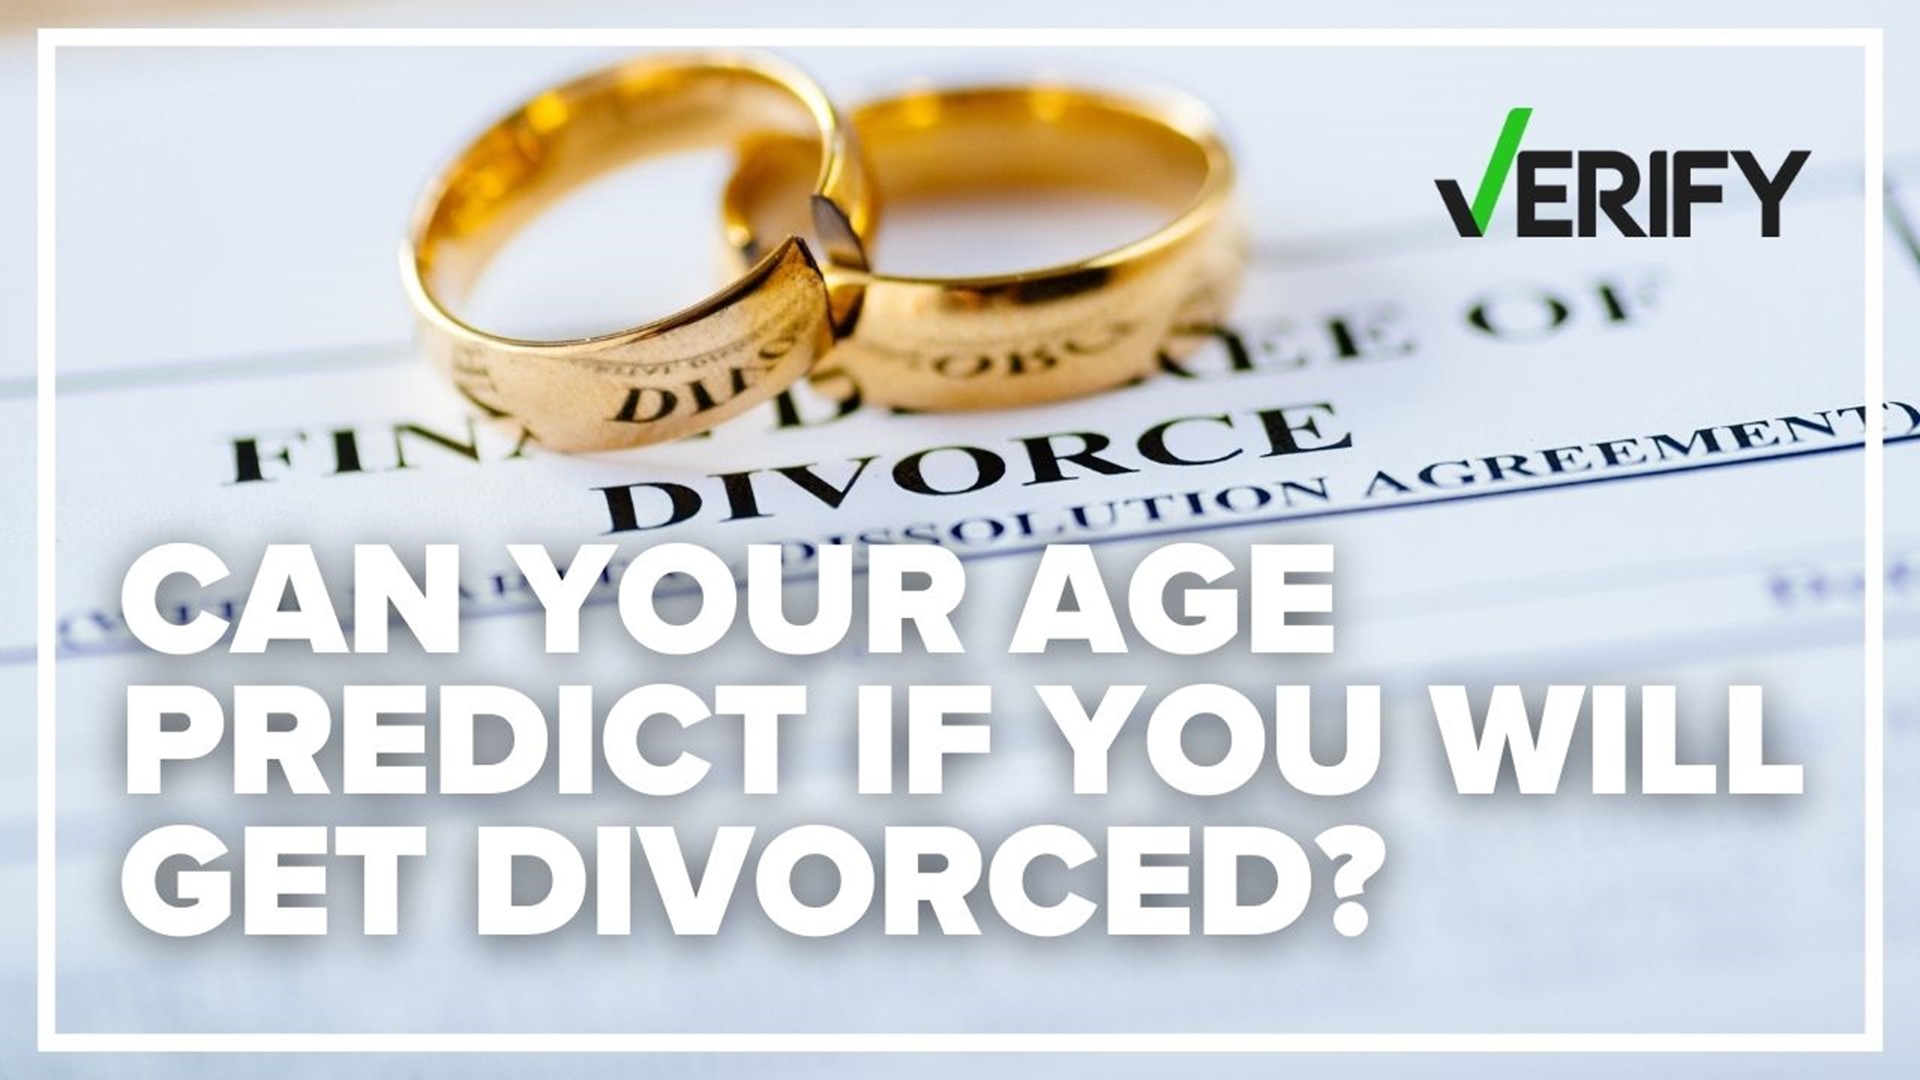 Research shows that if you get married before the age of 25, you're more likely to get divorced. Here's what behavioral experts say is behind the breakups.